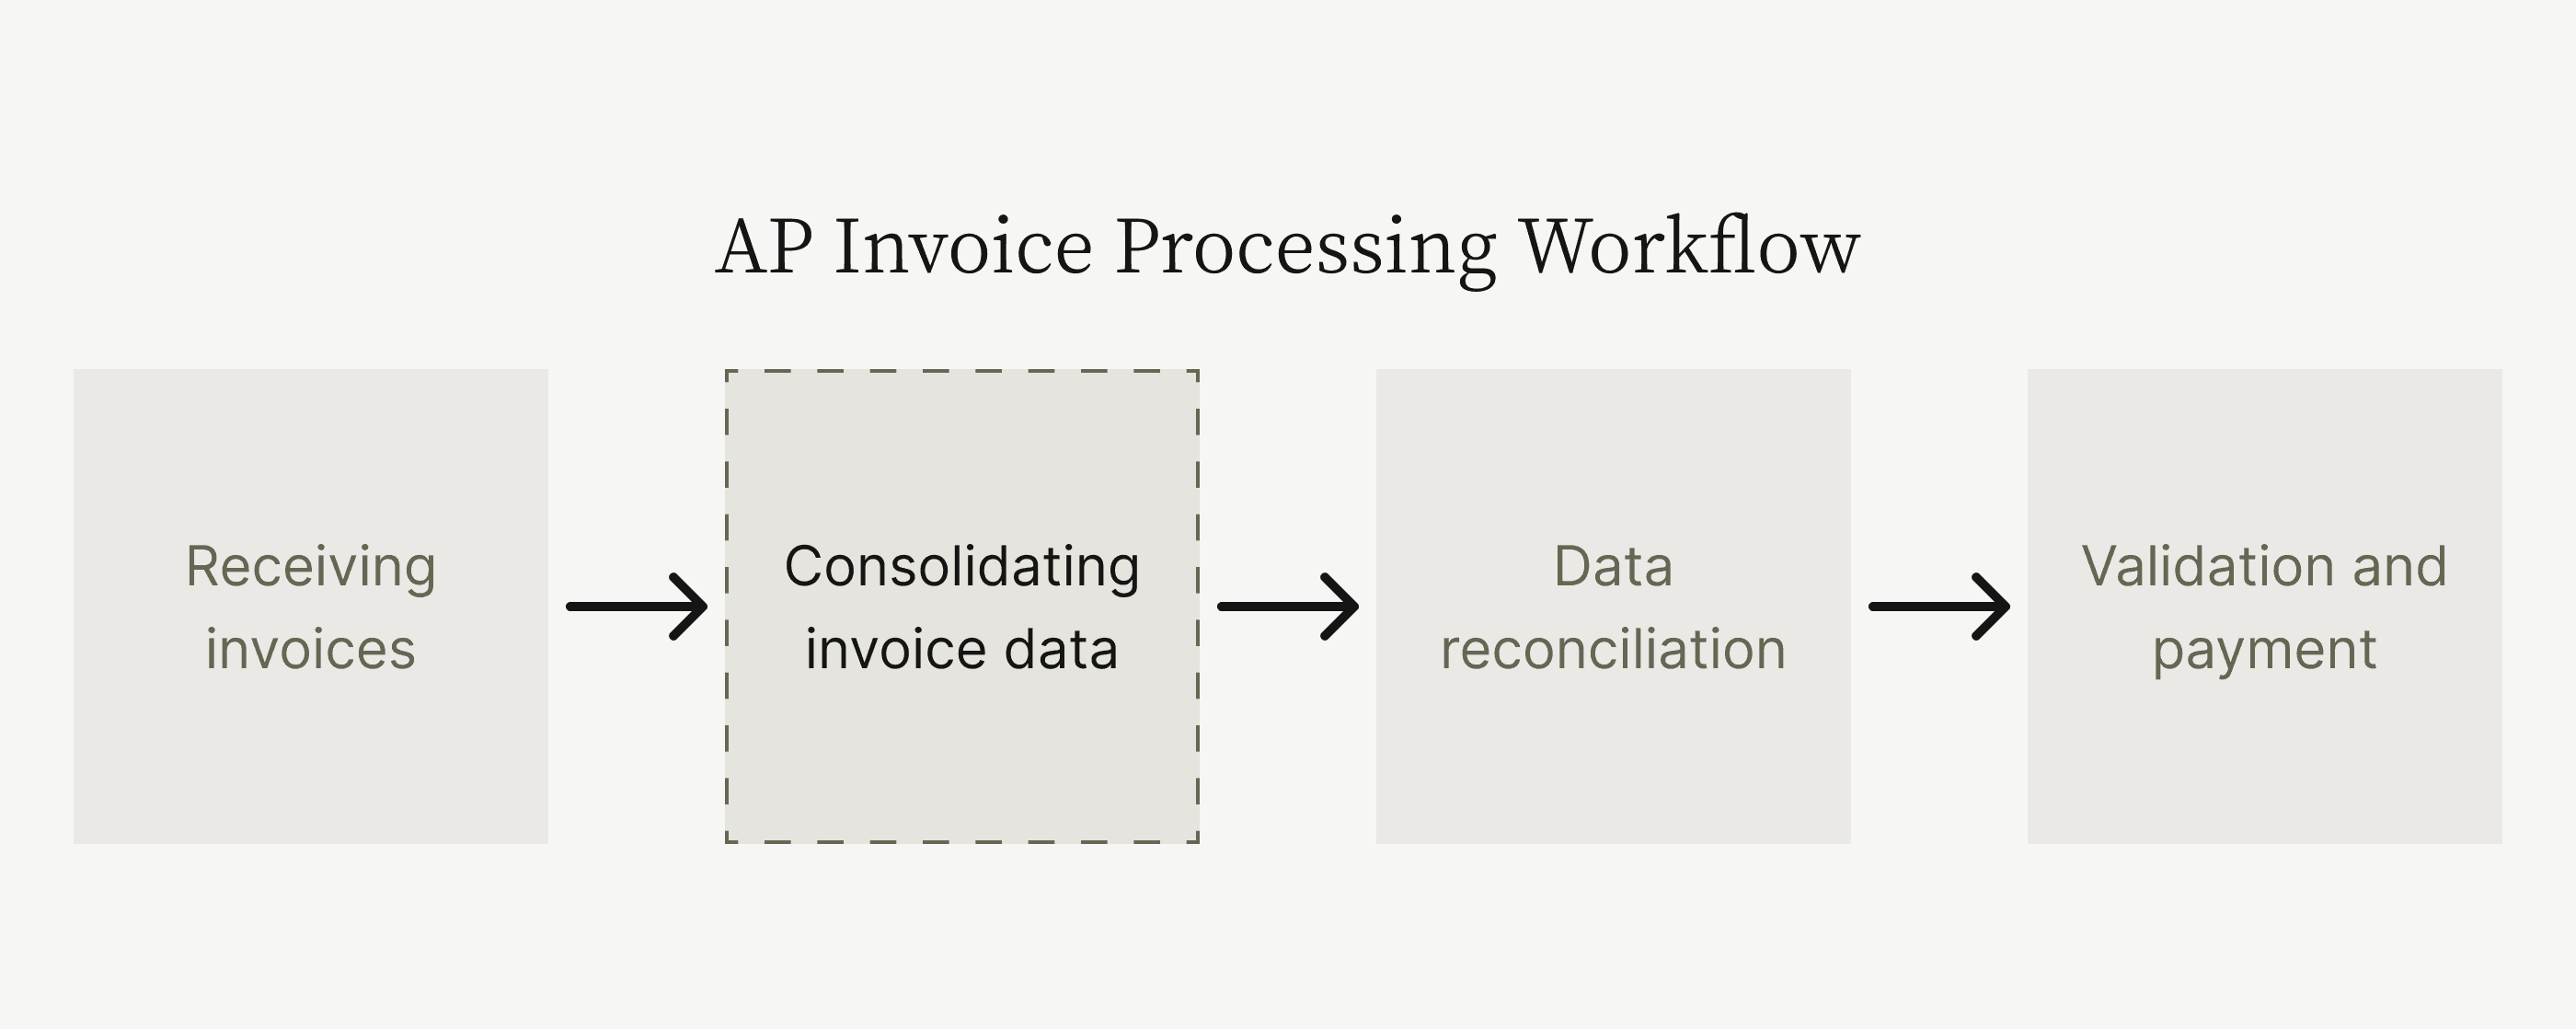 AP invoice processing workflow step 2: consolidating invoice data